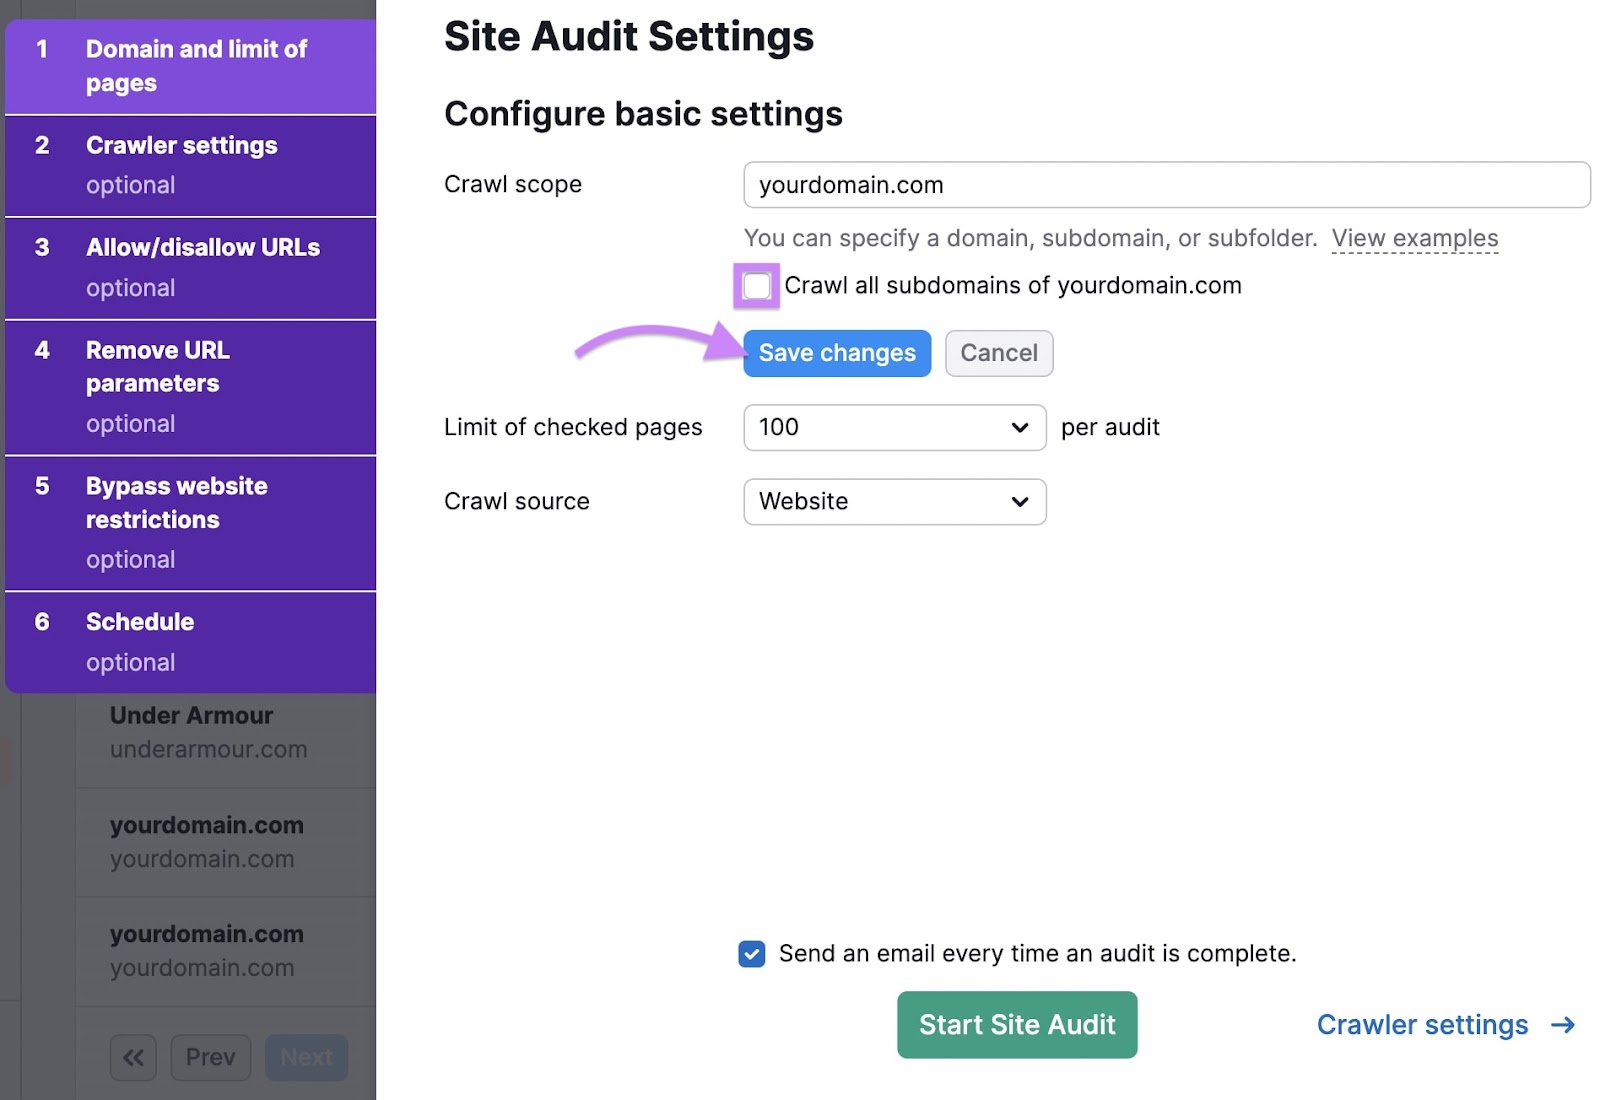 “Crawl all subdomains of [domain]” checkbox in Site Audit Settings